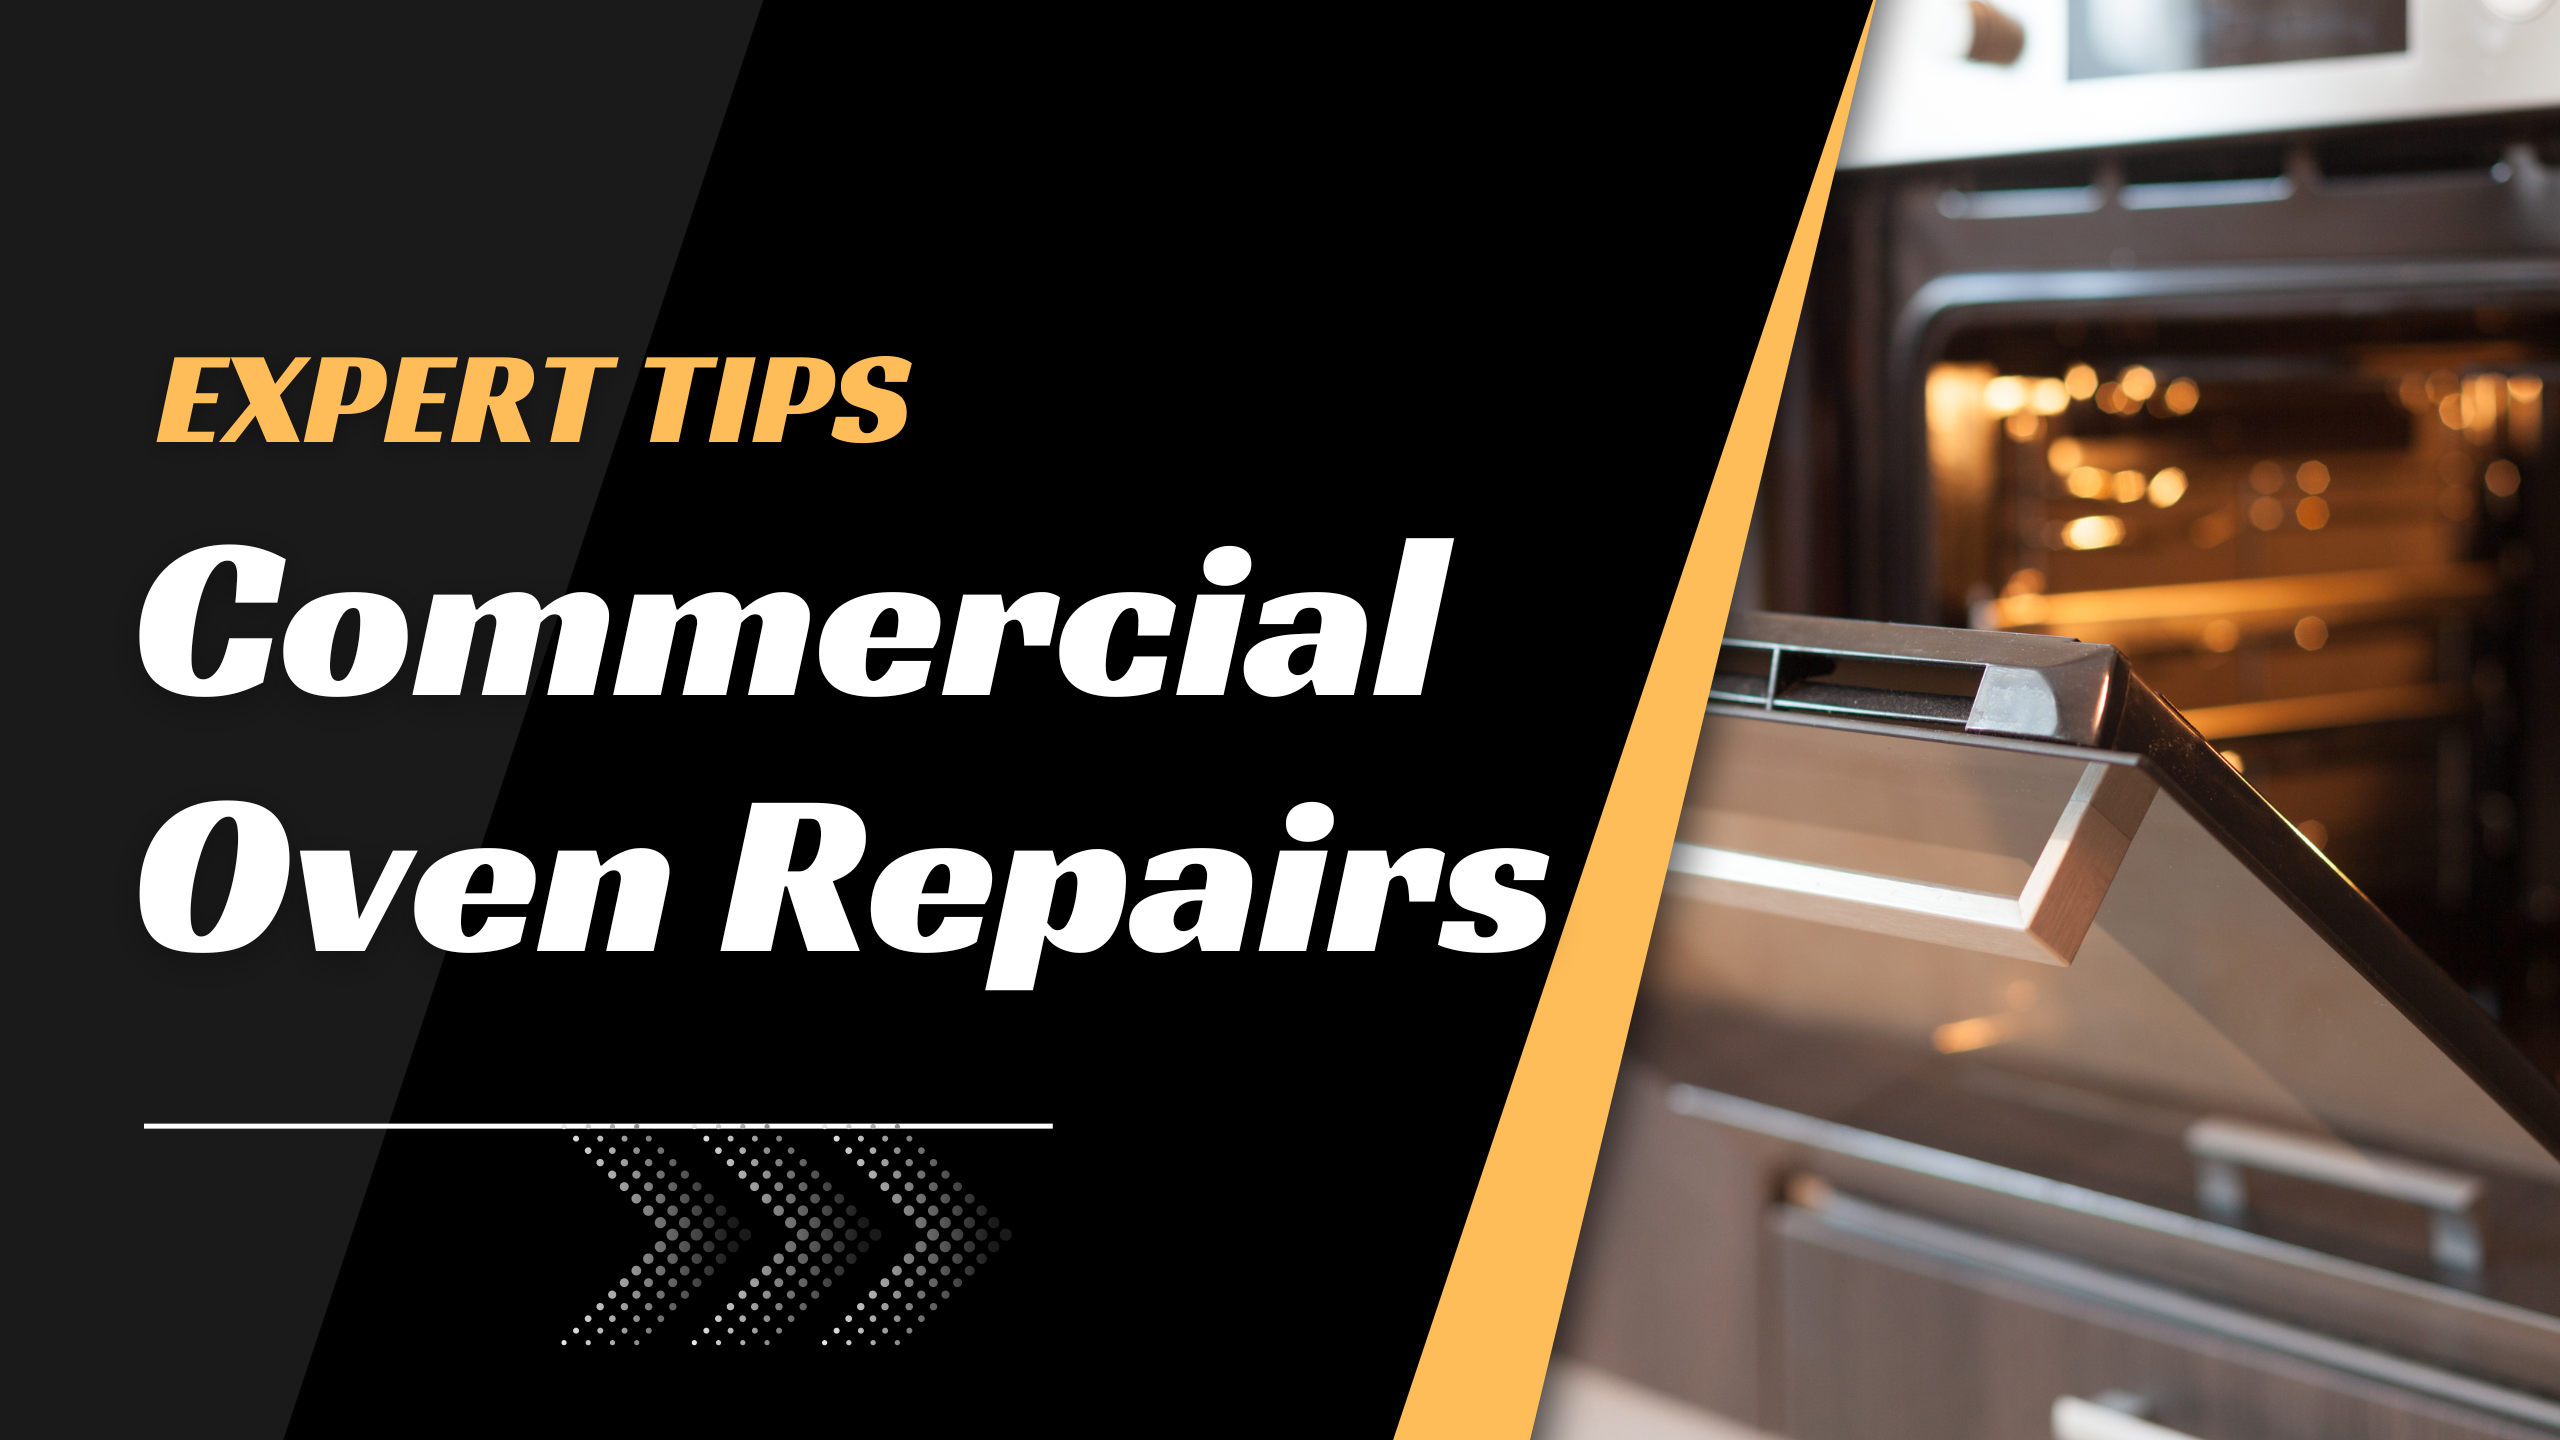 Expert Tips for Commercial Oven Repairs